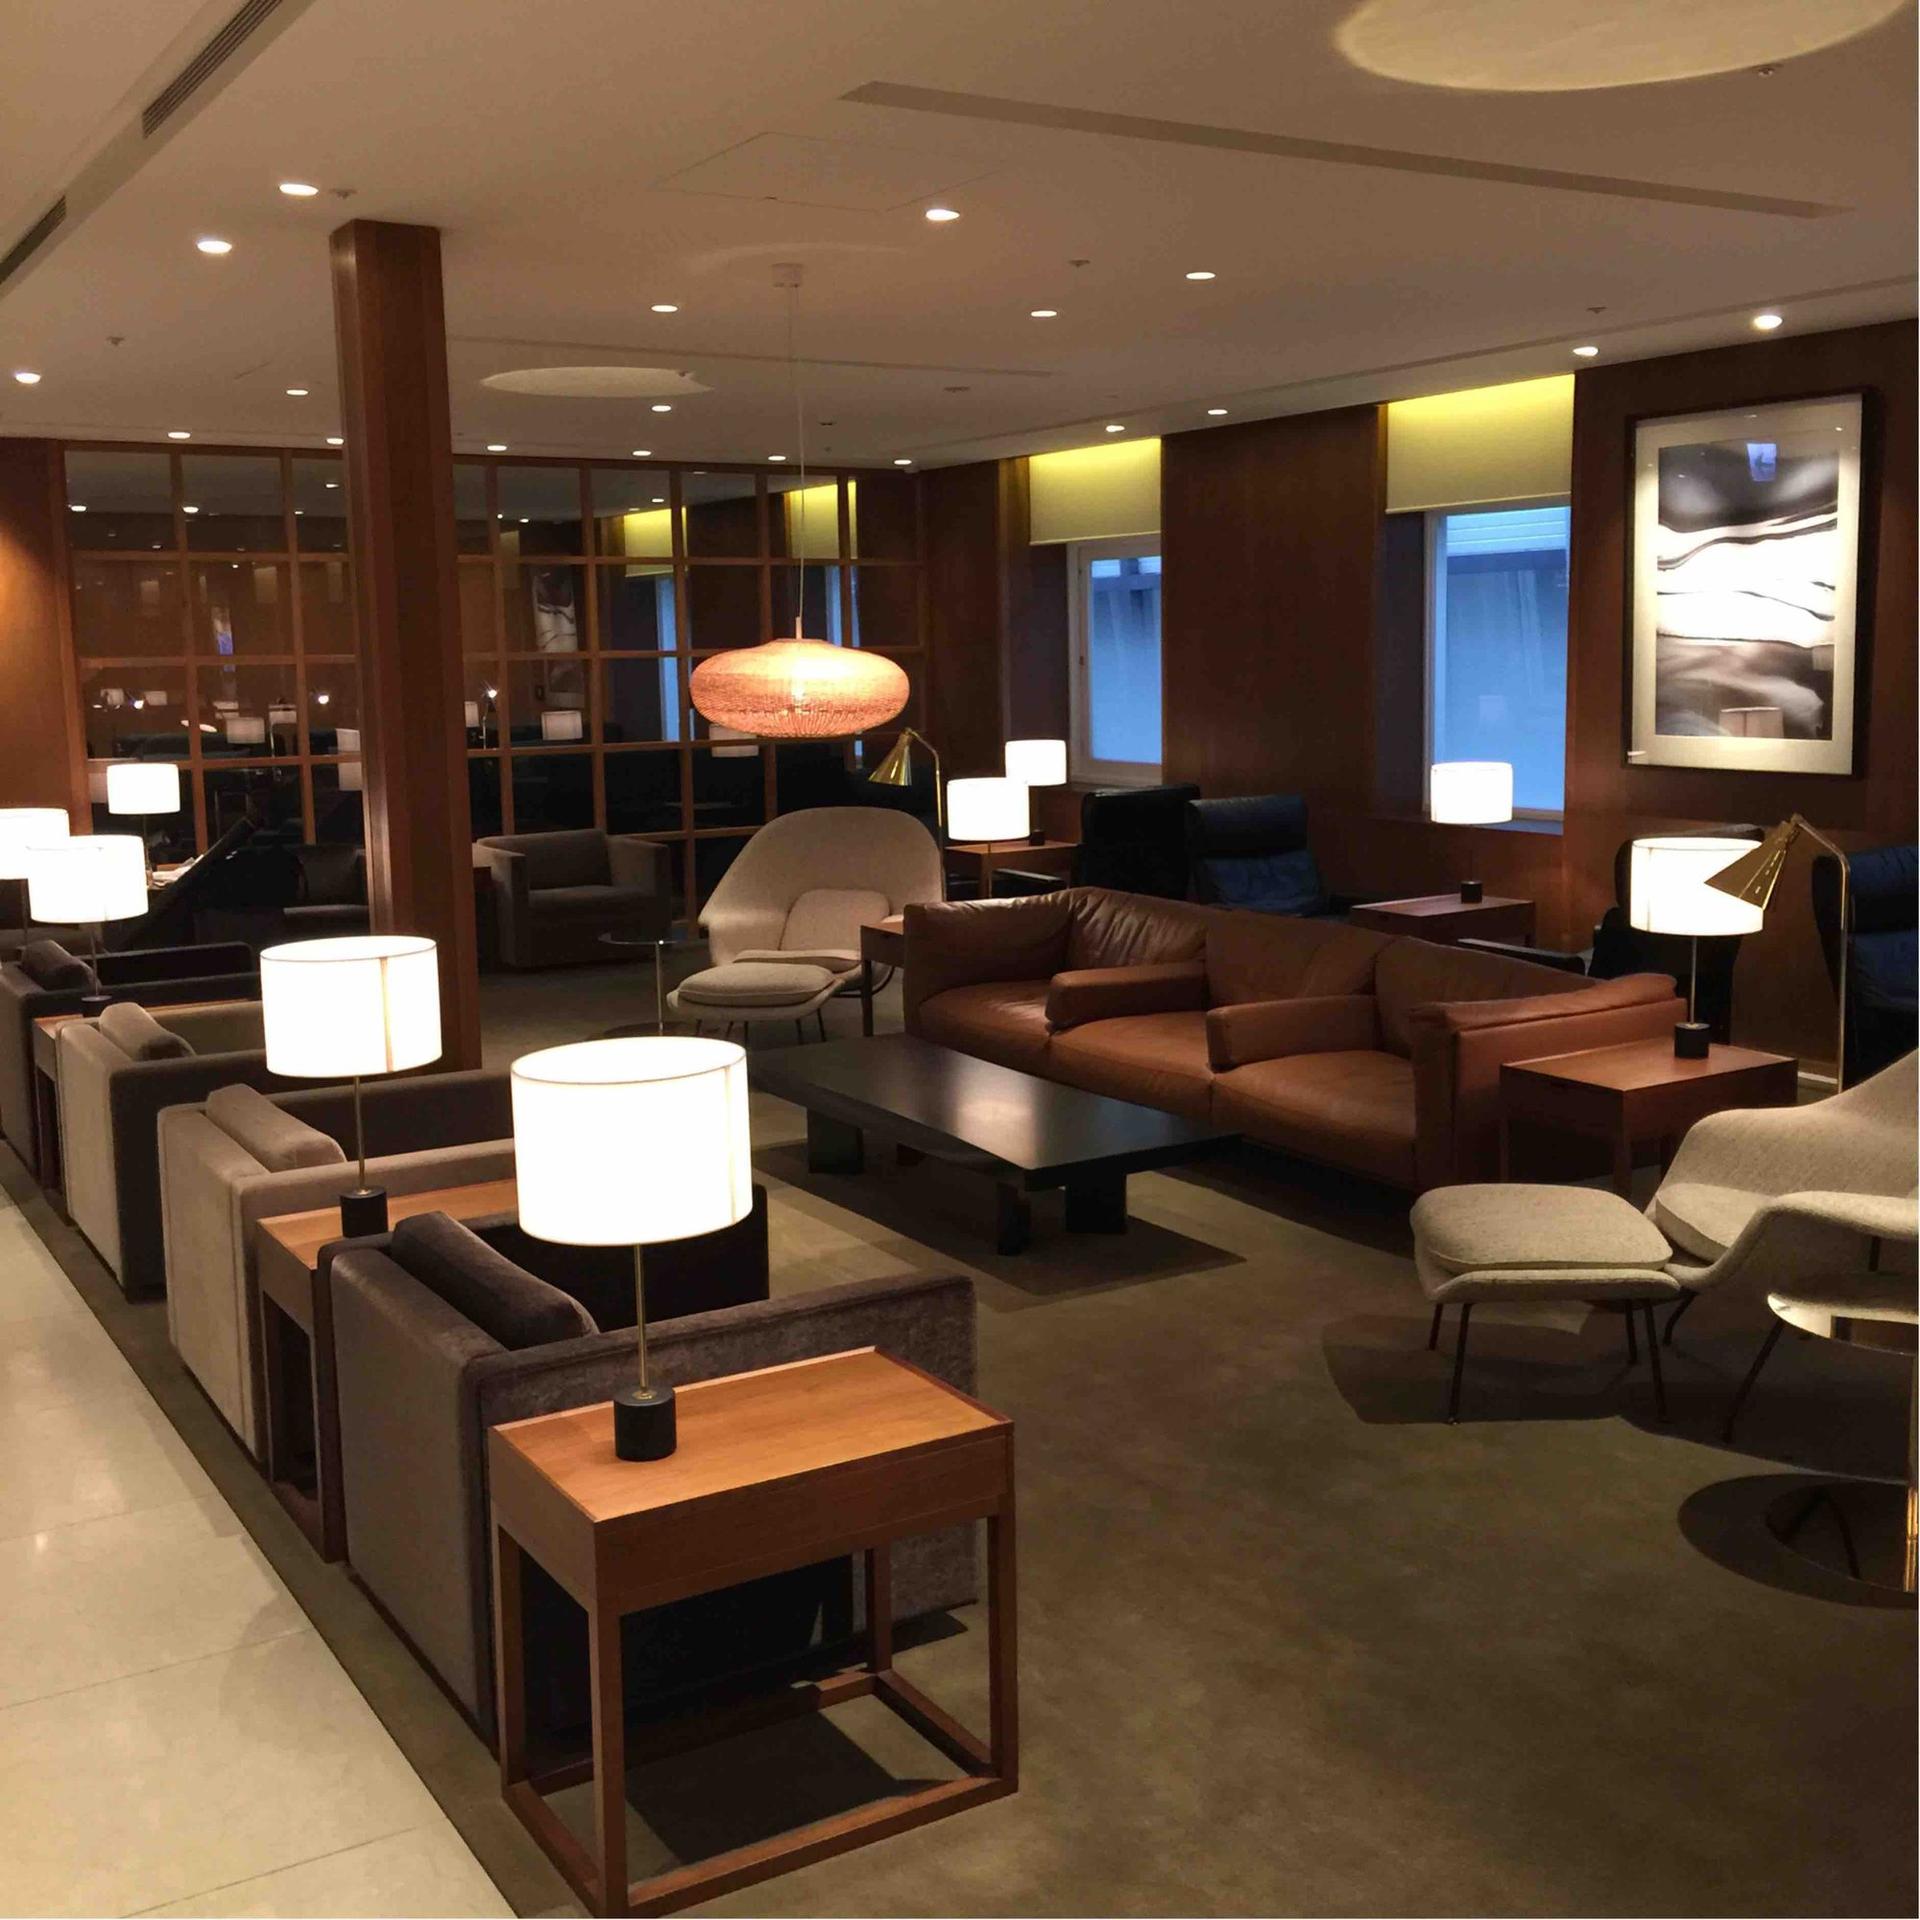 Cathay Pacific Lounge image 19 of 37